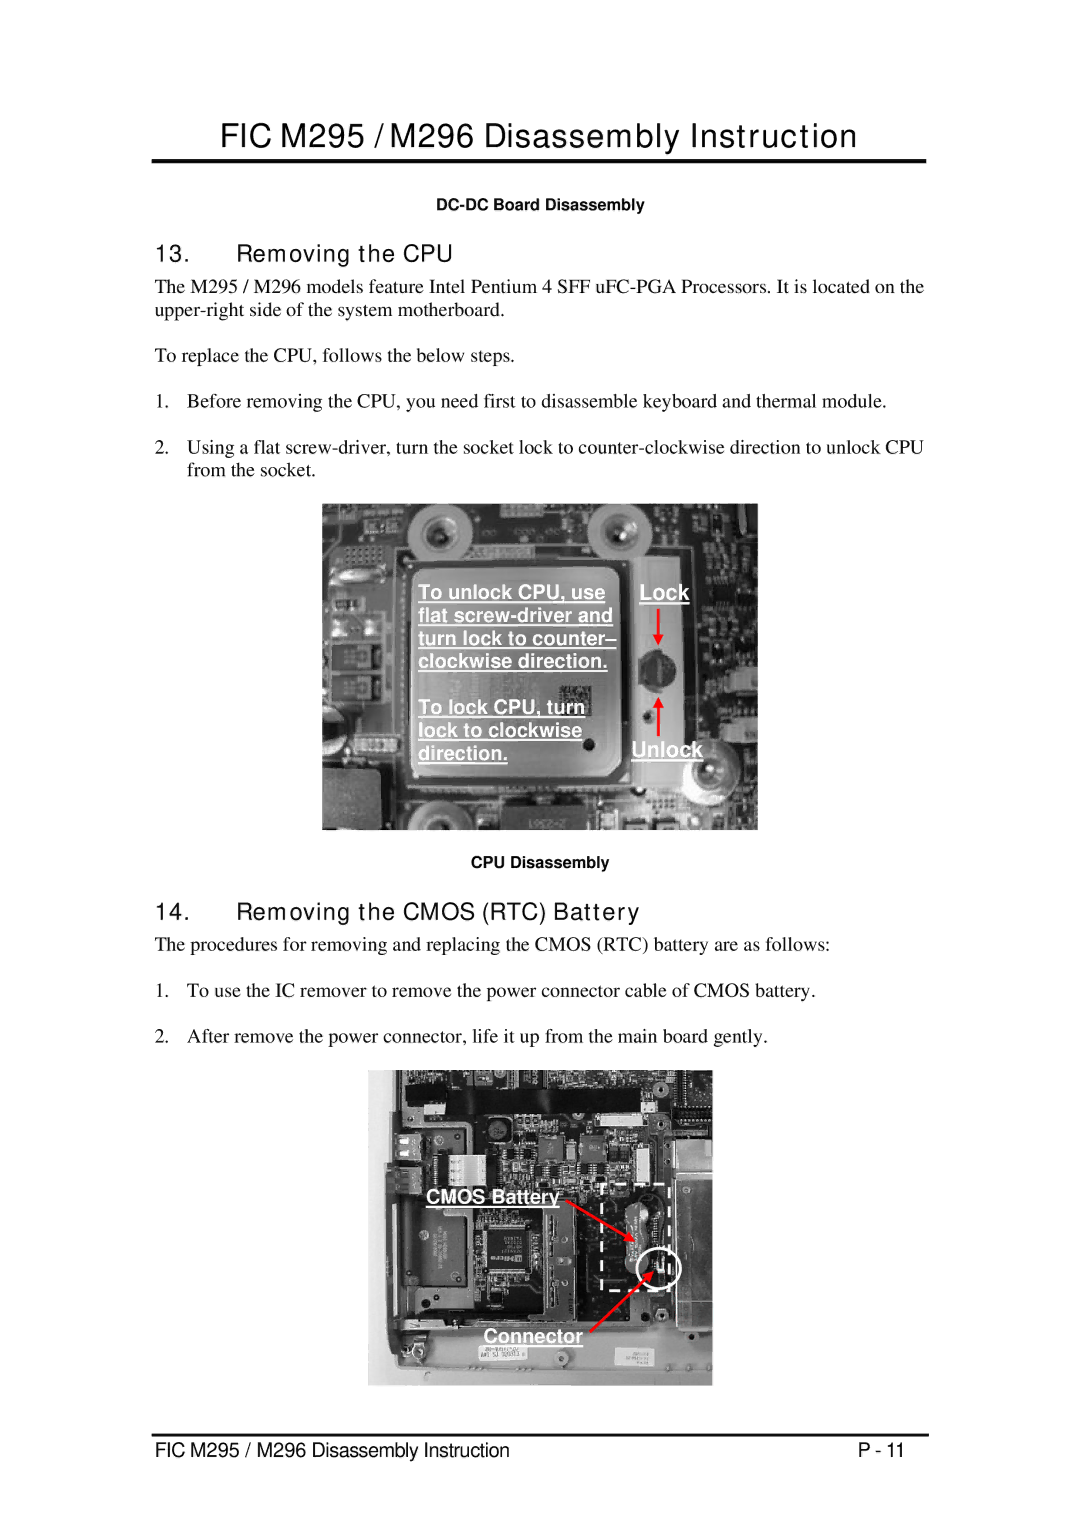 FIC M296, M295 service manual Removing the Cmos RTC Battery, DC-DC Board Disassembly, CPU Disassembly 